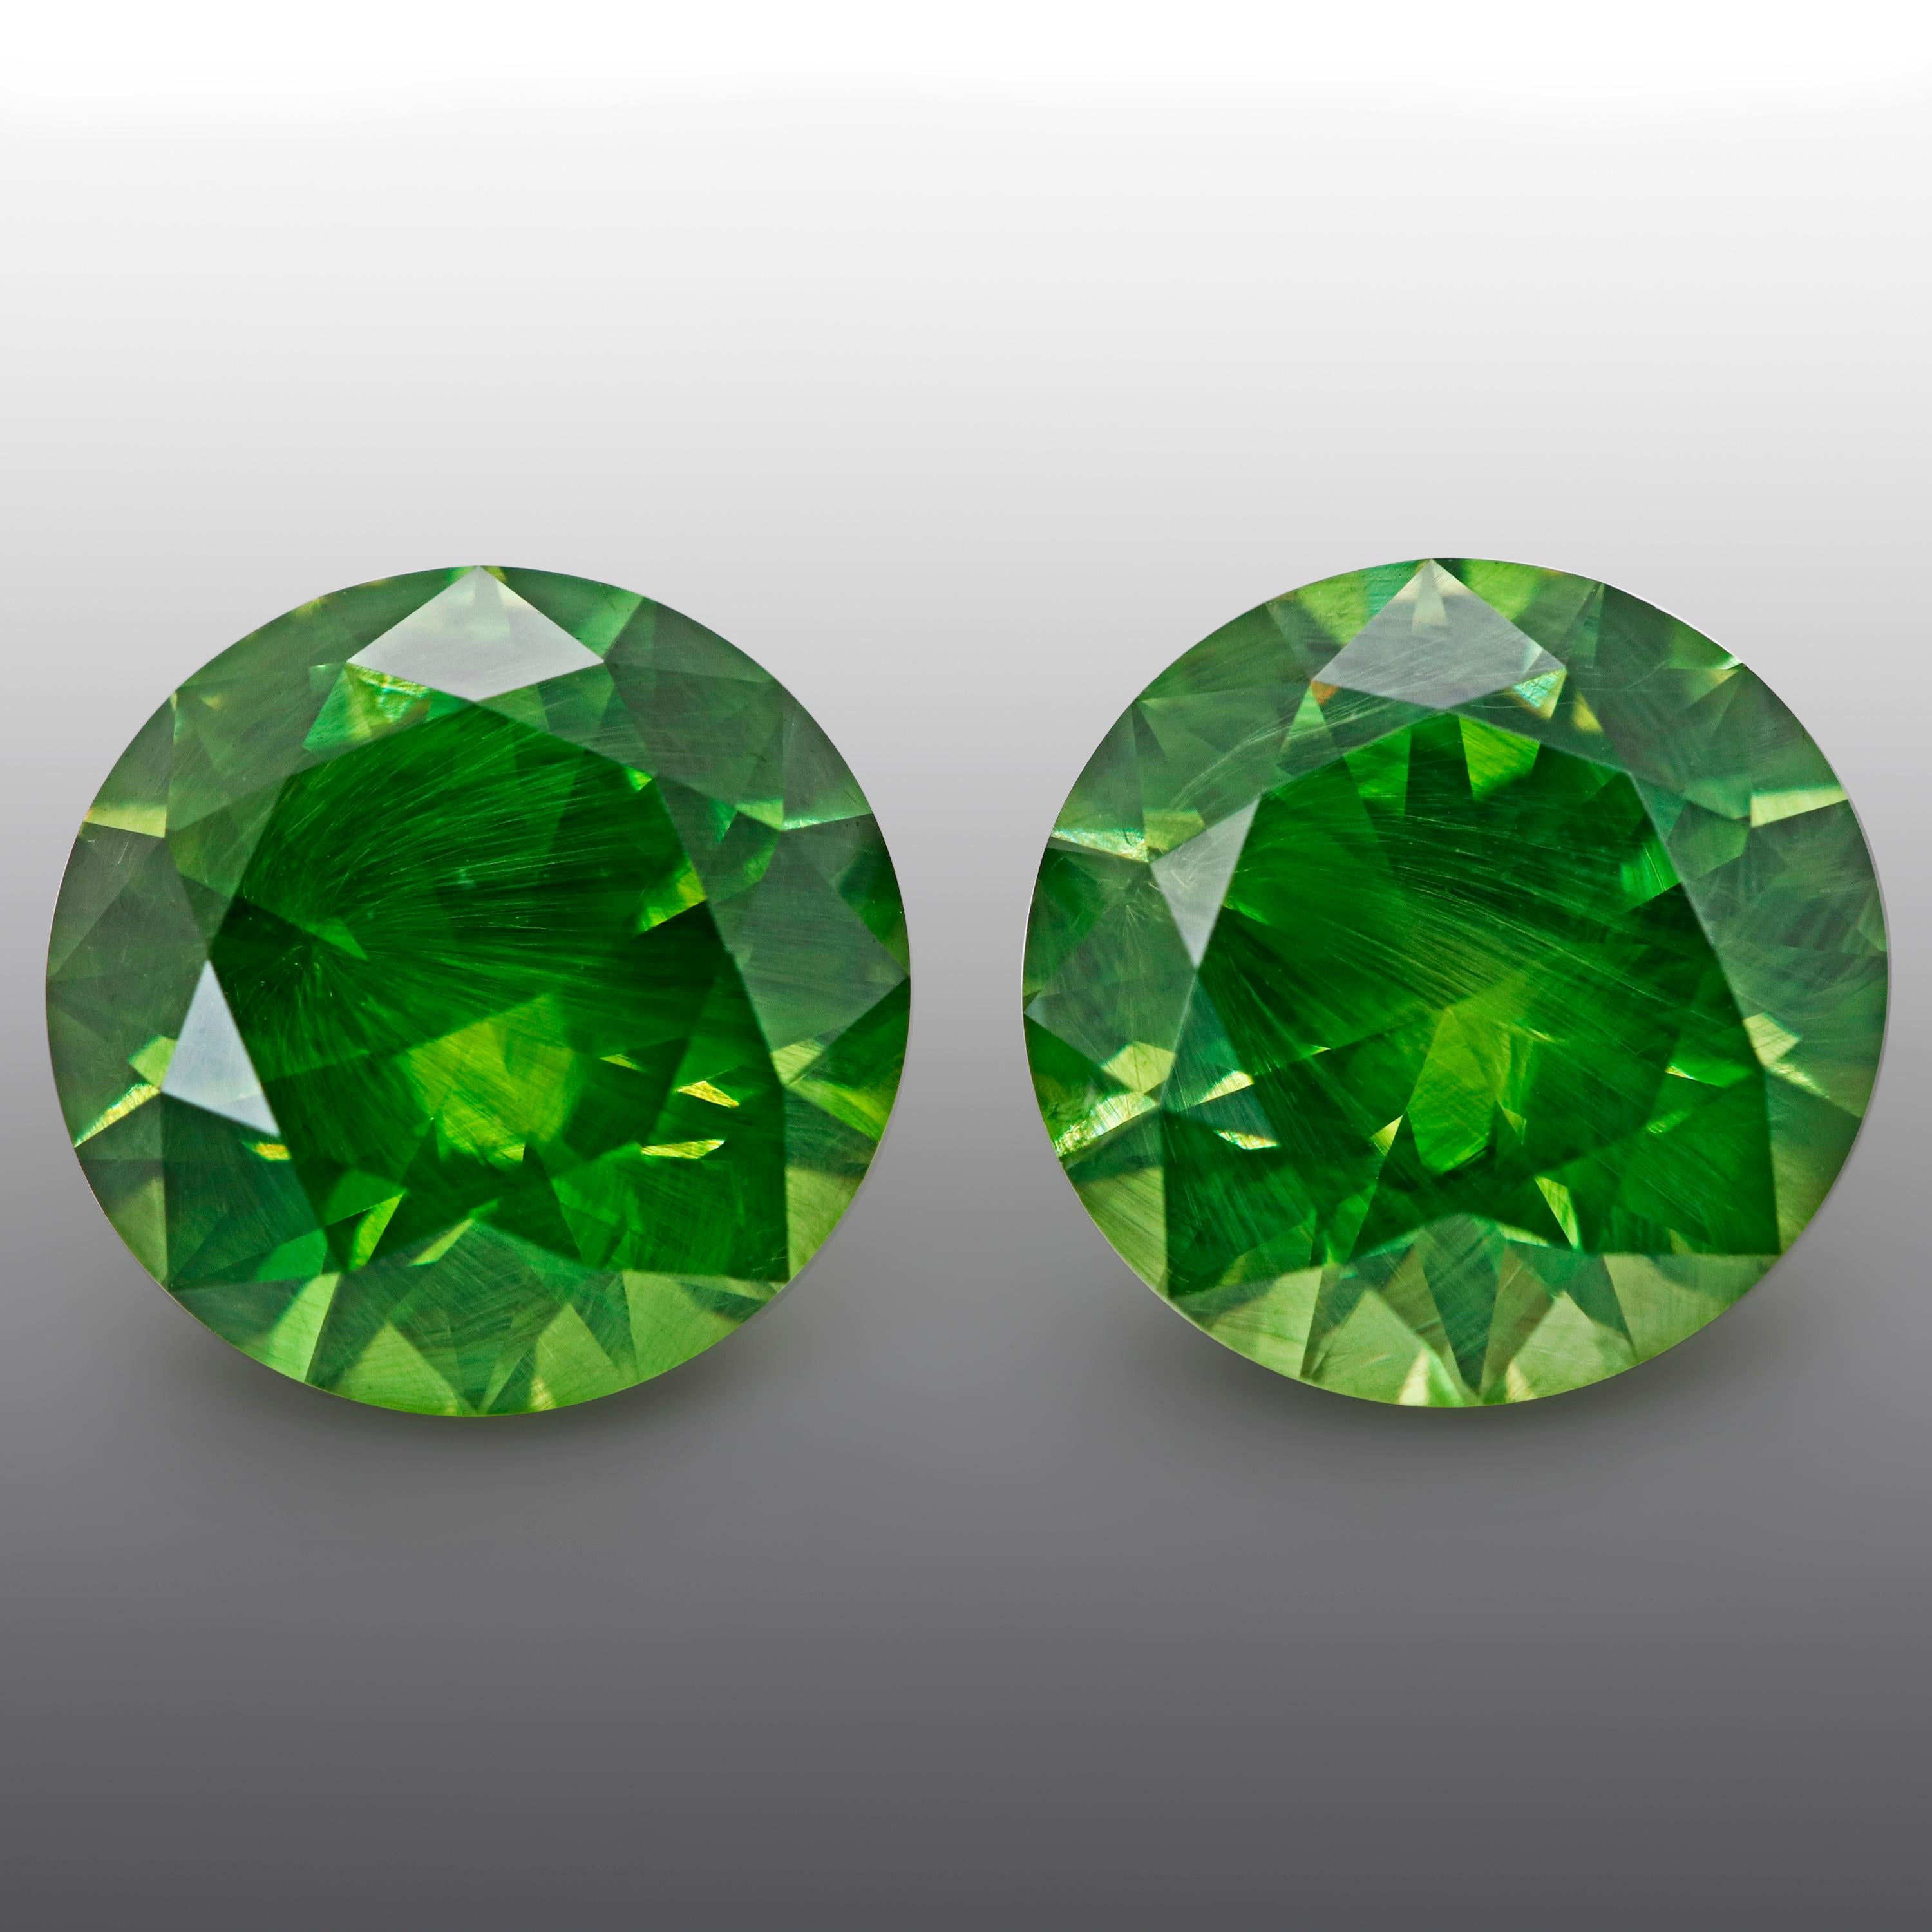 Demantoid is well-known by its unique inclusion called 